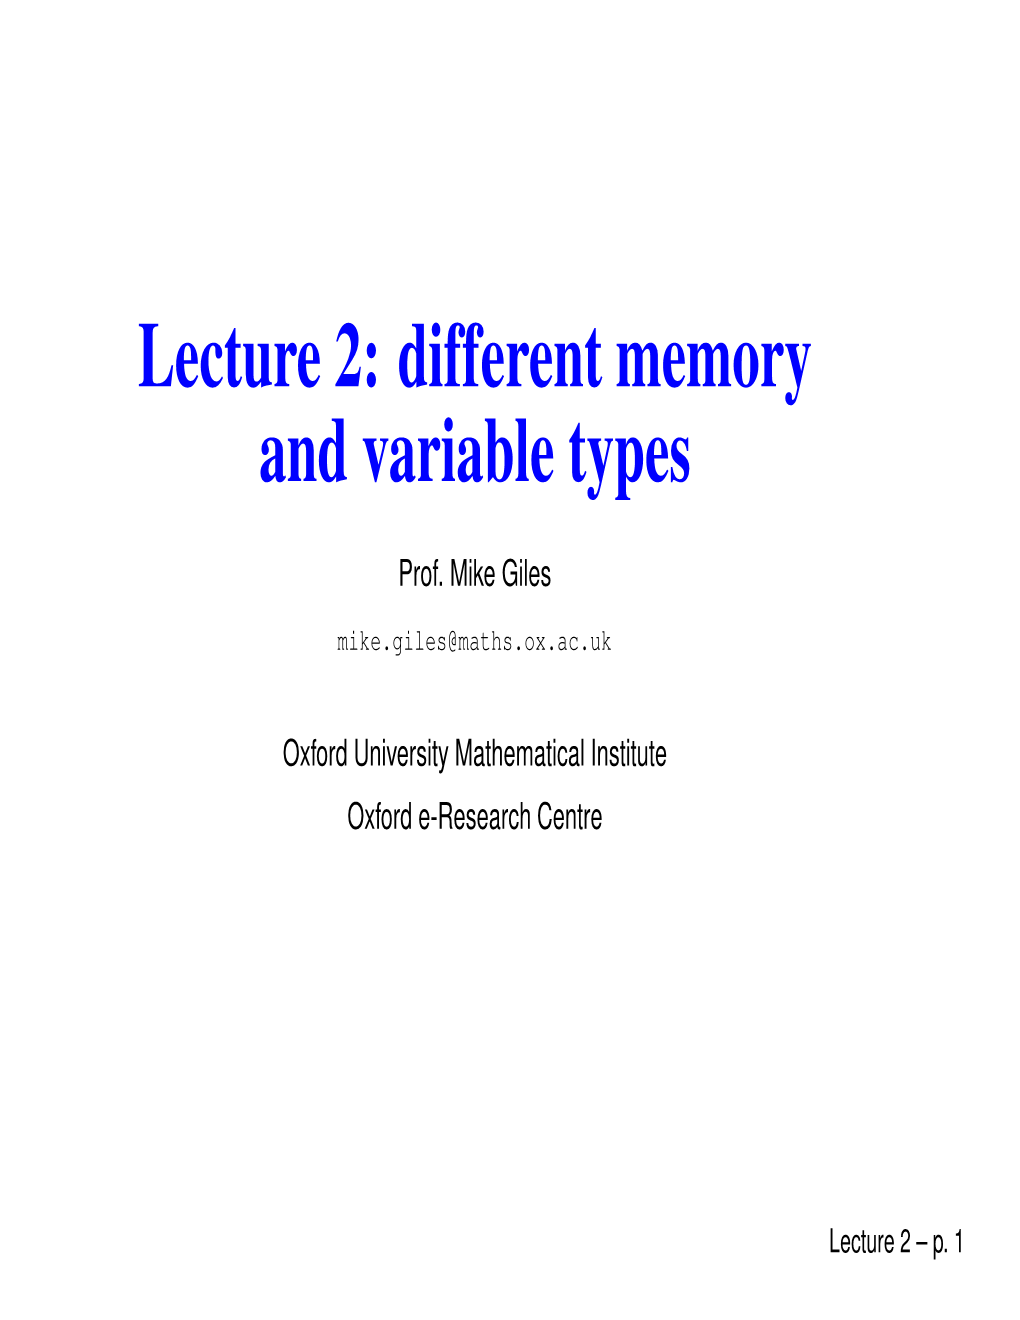 Lecture 2: Different Memory and Variable Types